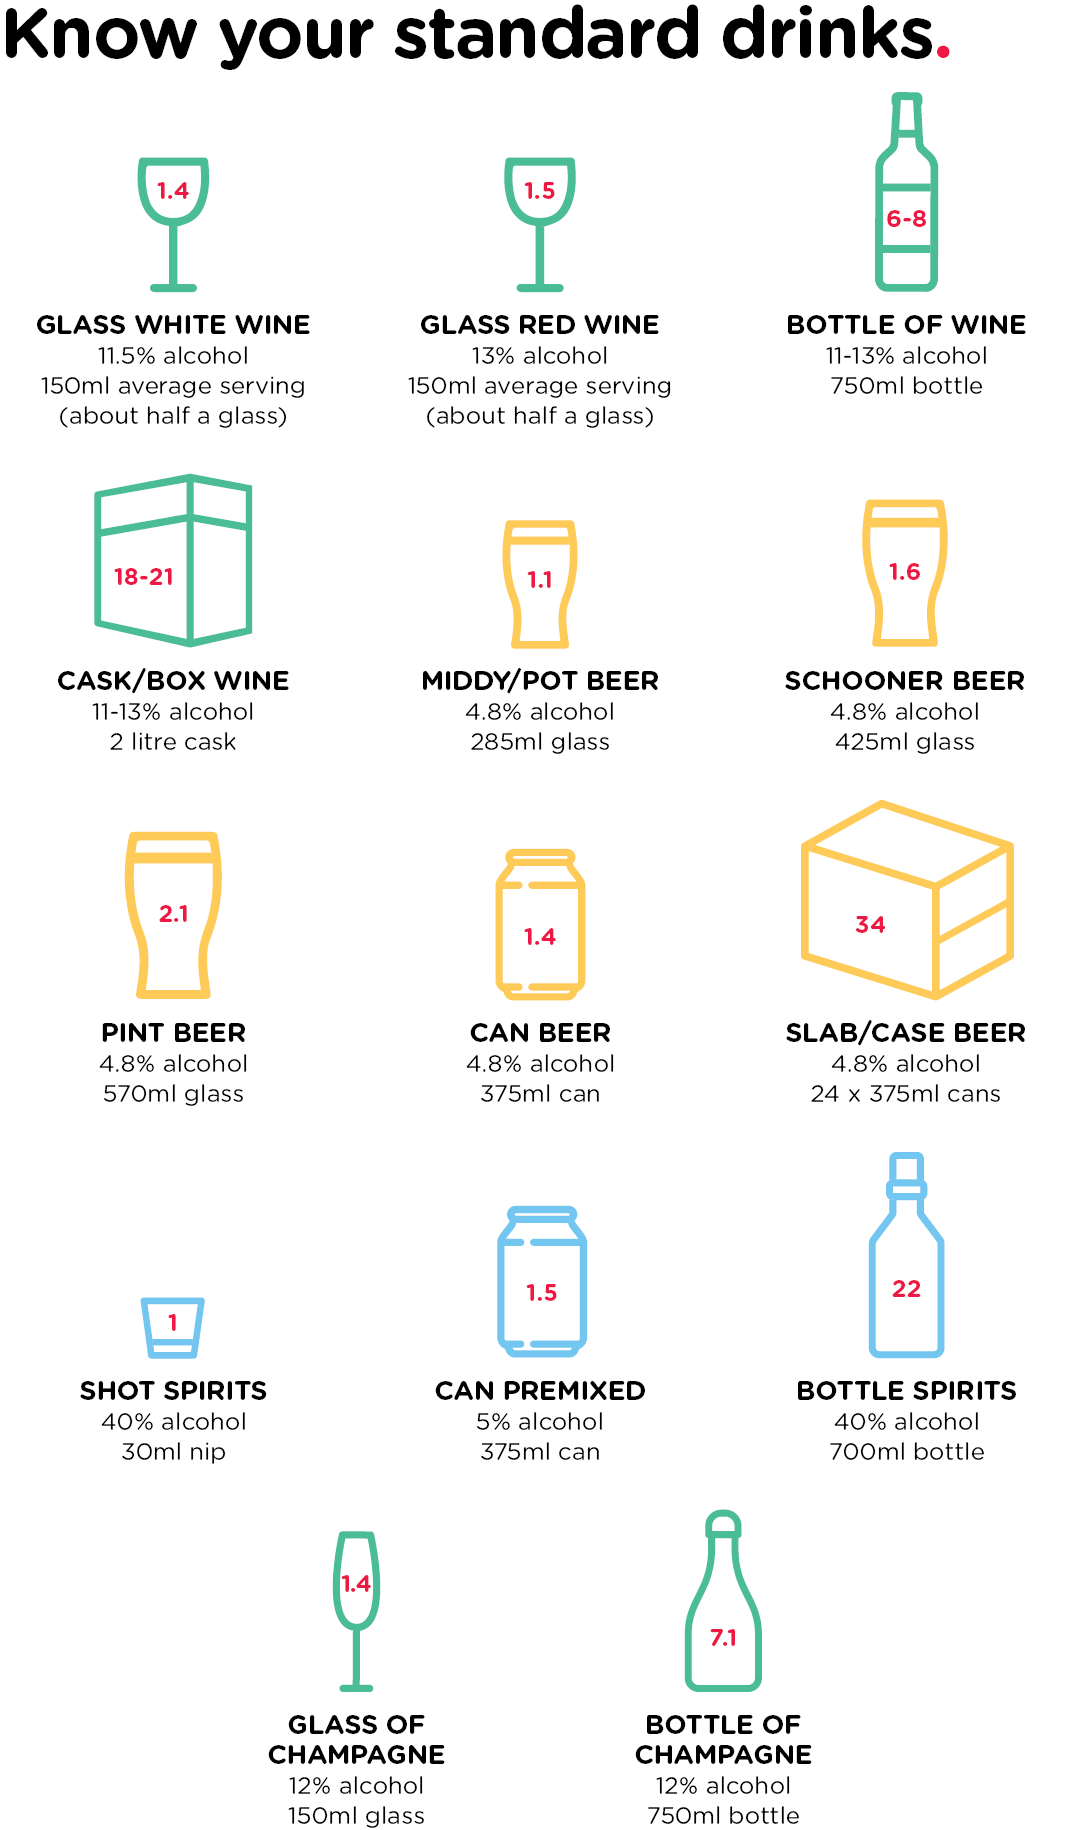 Know Your Standard Drinks